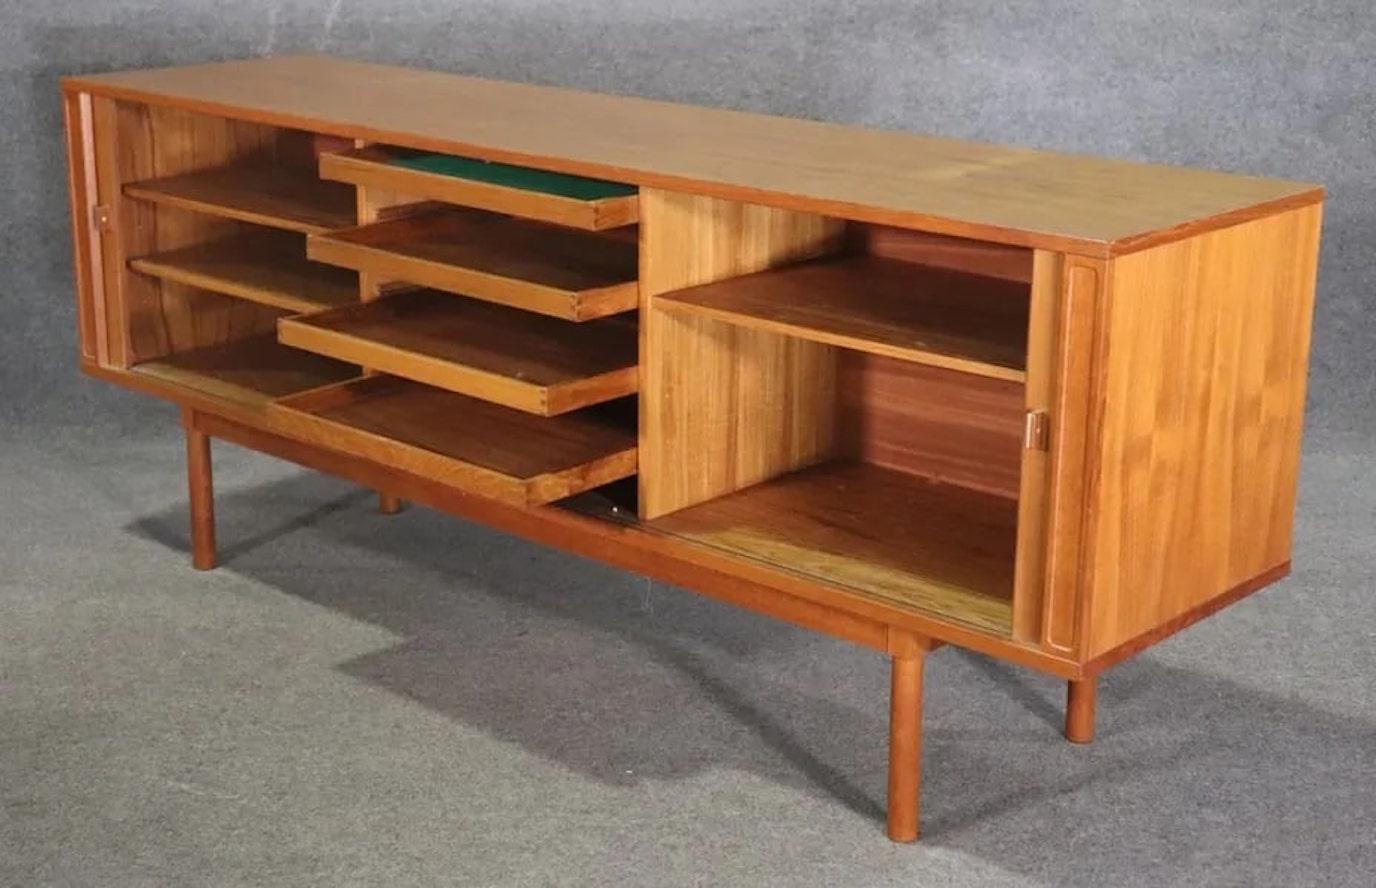 Gorgeous Danish modern sideboard designed by Peter Løvig Nielsen. Handsome design with tambour doors, finished back and warm teak grain throughout.
Please confirm location NY or NJ